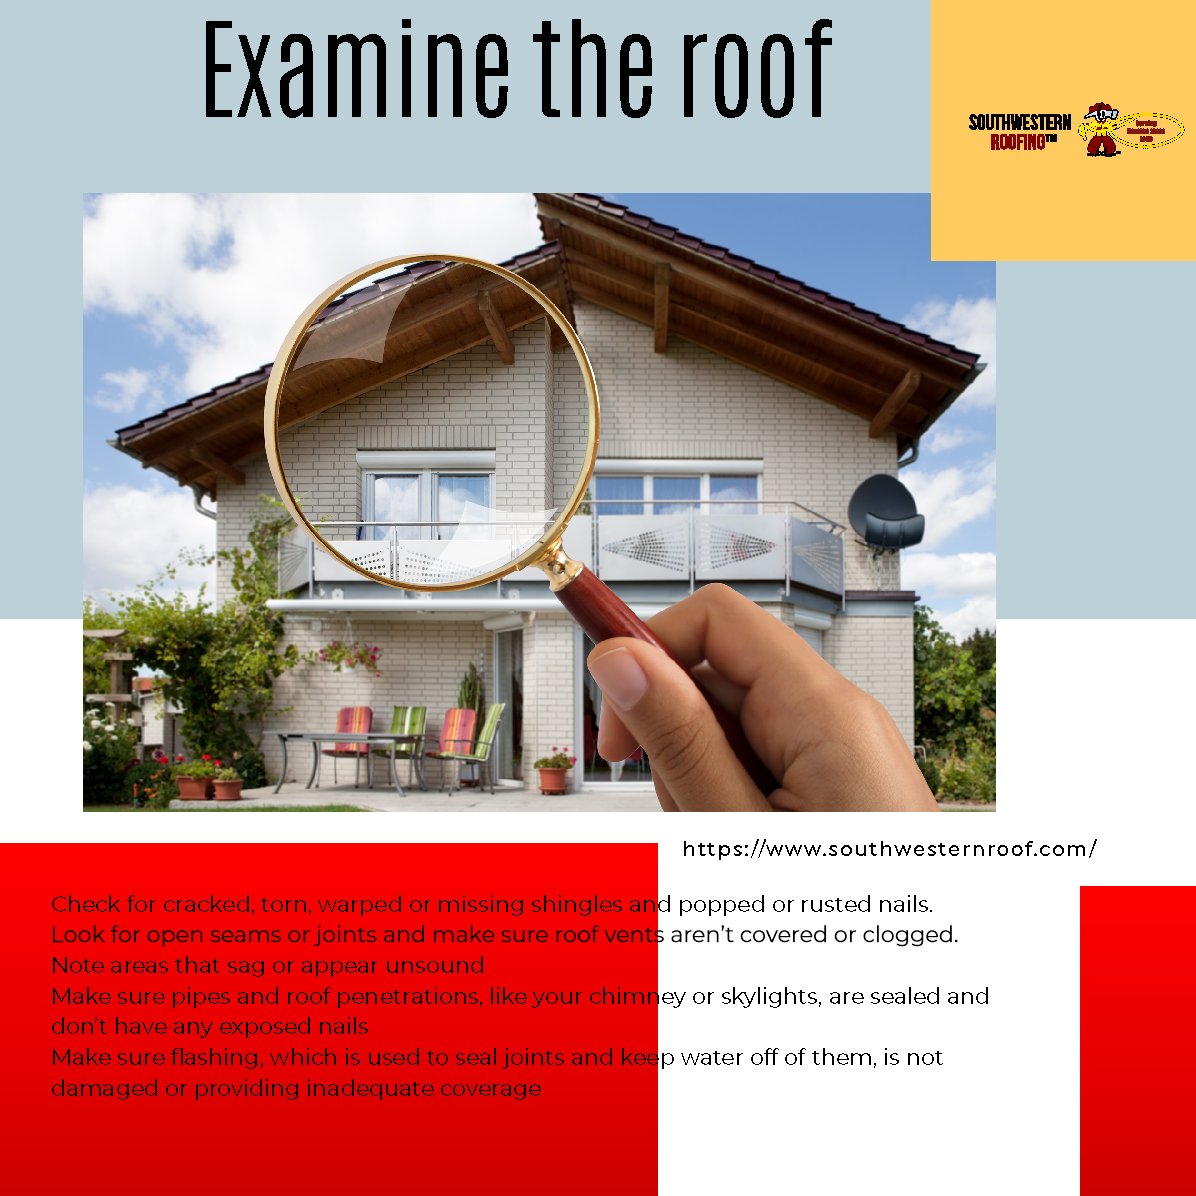 🔍✨ Don't let roof issues catch you off guard. Learn the art of inspection like a pro! 💪🏡 #RoofingMastery #HomeMaintenance101 #SouthwesternRoofing #InspectLikeAPro #DIYRoofCare #HomeSweetHome #RoofingTips #HomeImprovementMagic #ProtectYourNest #RoofingWisdom 

🔨 We offer  ...